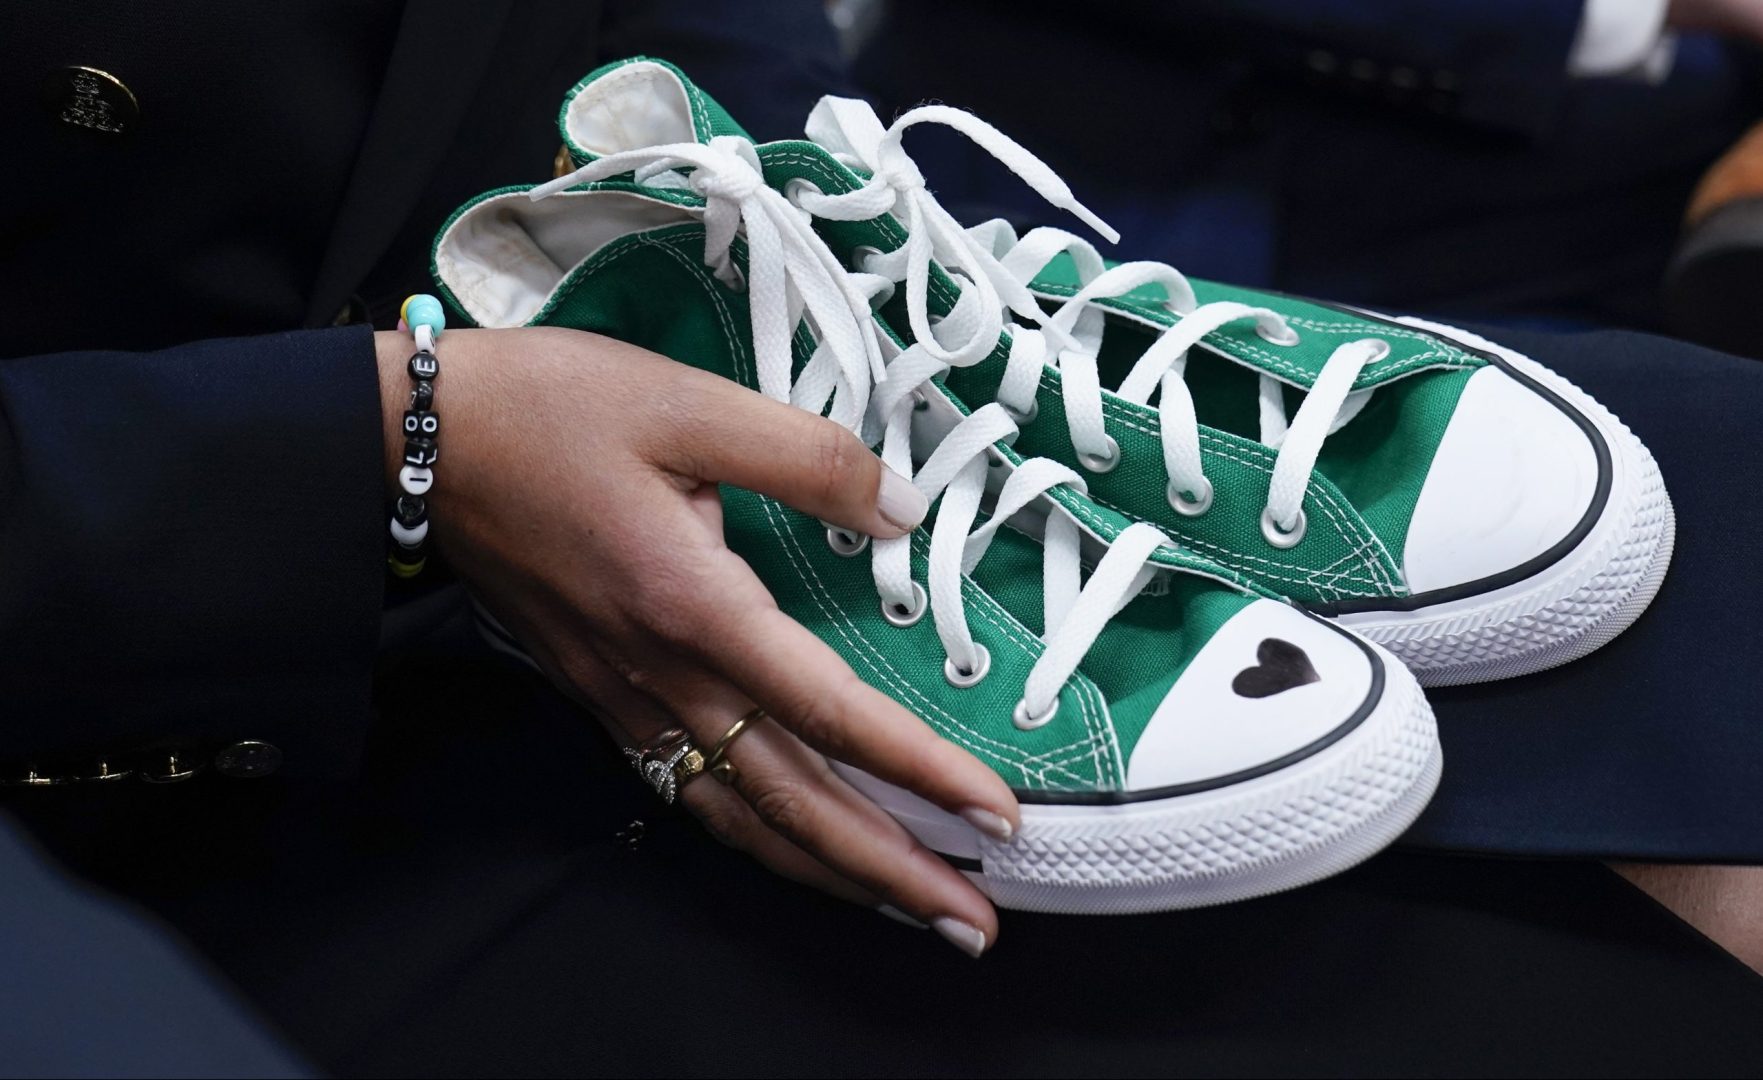 Camila Alves McConaughey holds the bright green Converse tennis shoes worn by Maite Yuleana Rodriguez, 10, who was a victim of Uvalde shootings when Matthew McConaughey, a native of Uvalde, Texas, met White House press secretary Karine Jean-Pierre , at the daily briefing at the White House in Washington, Tuesday, June 7, 2022. 